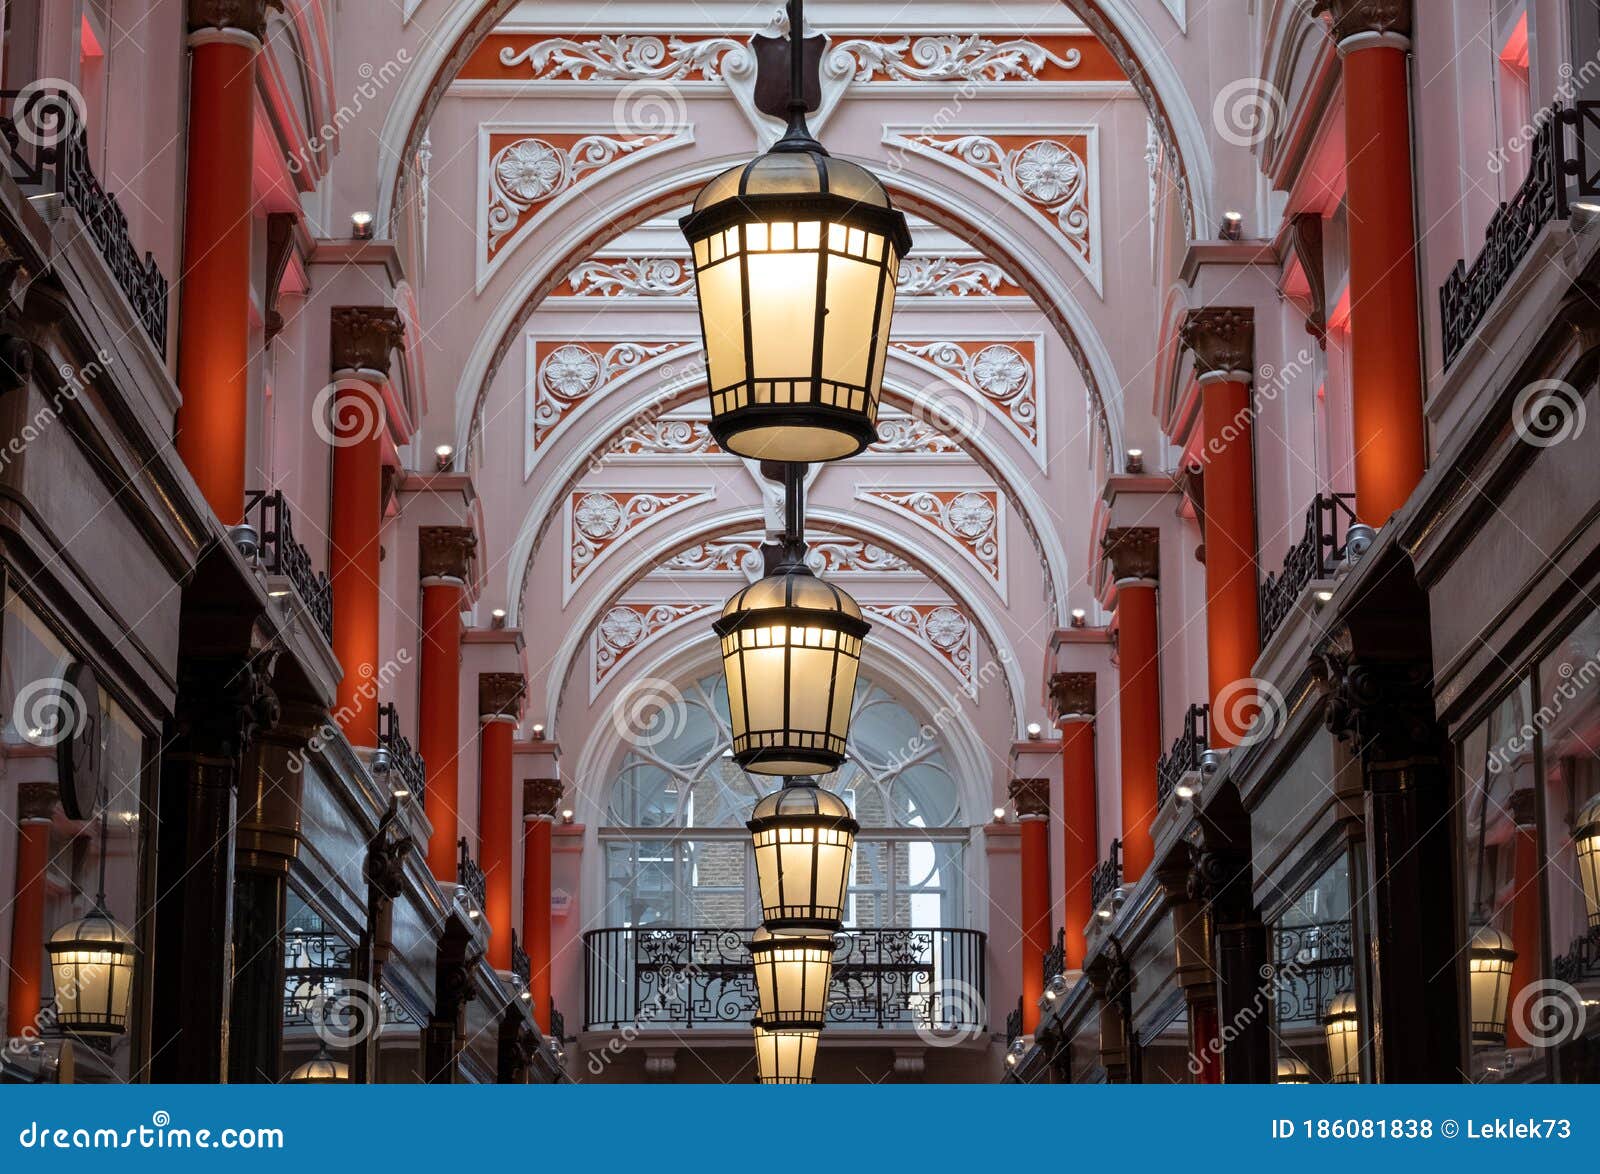 royal arcade in bond street, mayfair uk: beautifully restored victorian shopping arcade with luxury shops.